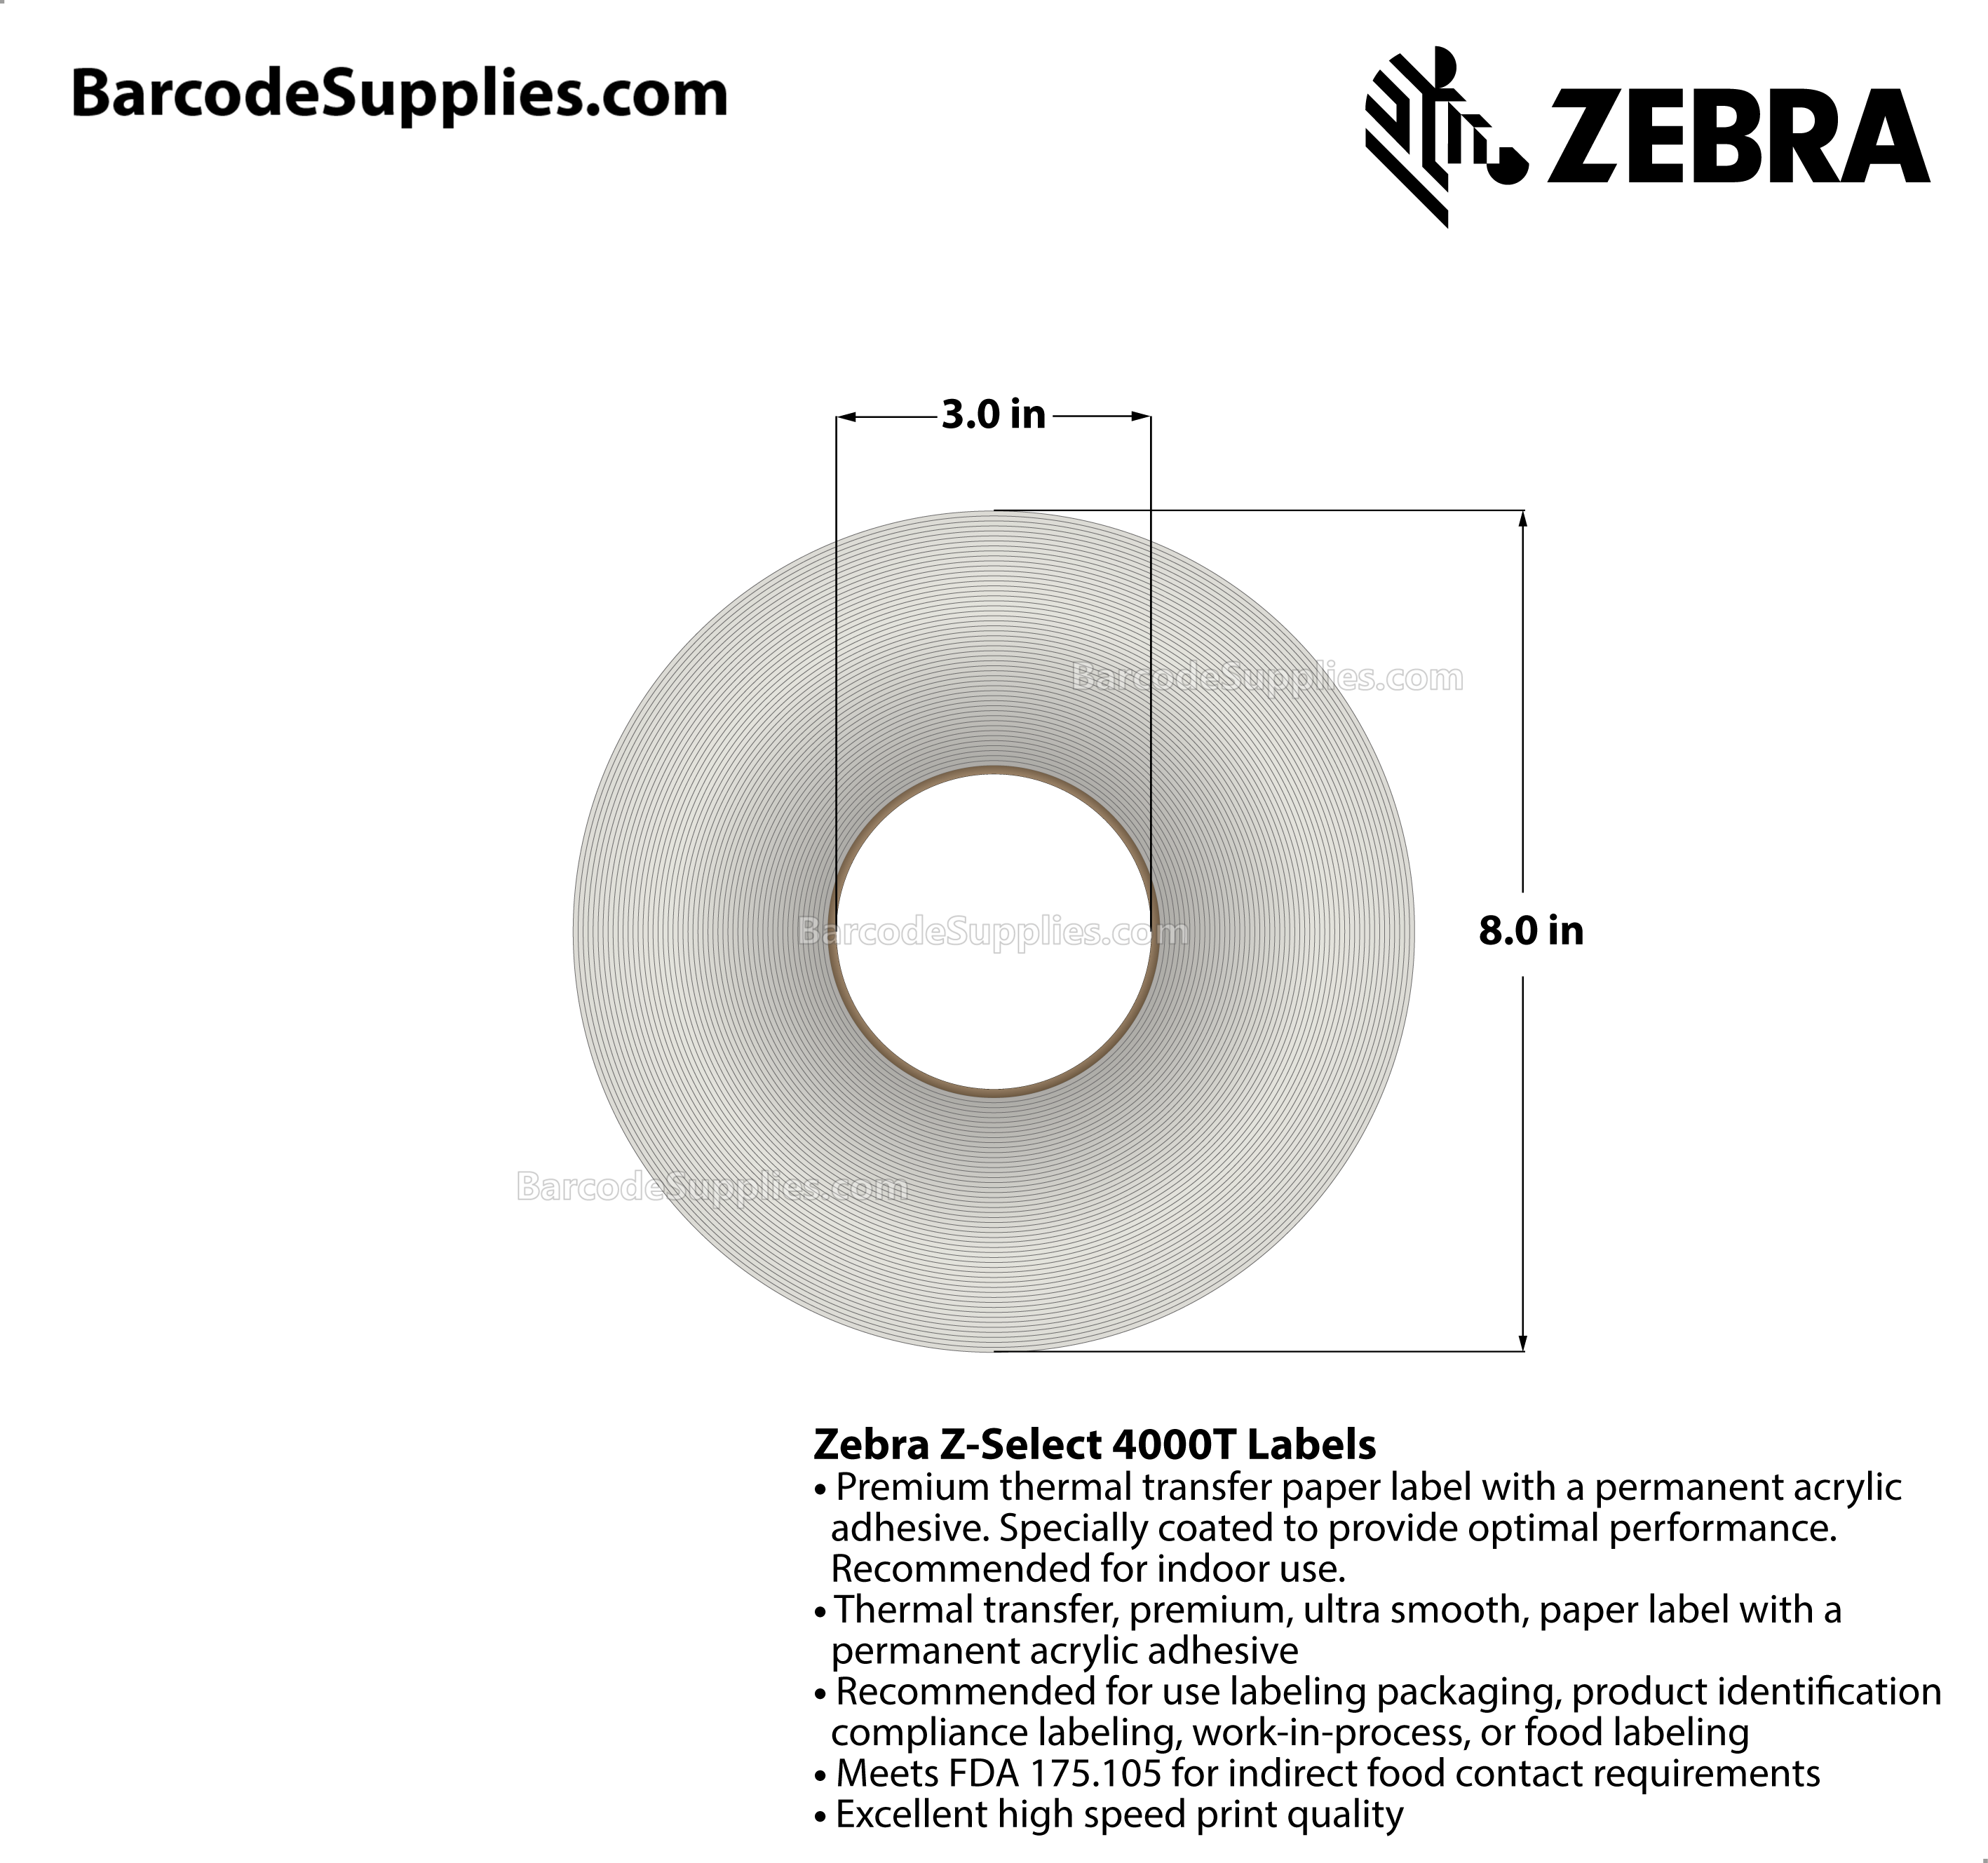 4 x 2 Thermal Transfer White Z-Select 4000T Labels With Permanent Adhesive - Not Perforated - 2740 Labels Per Roll - Carton Of 4 Rolls - 10960 Labels Total - MPN: 72289